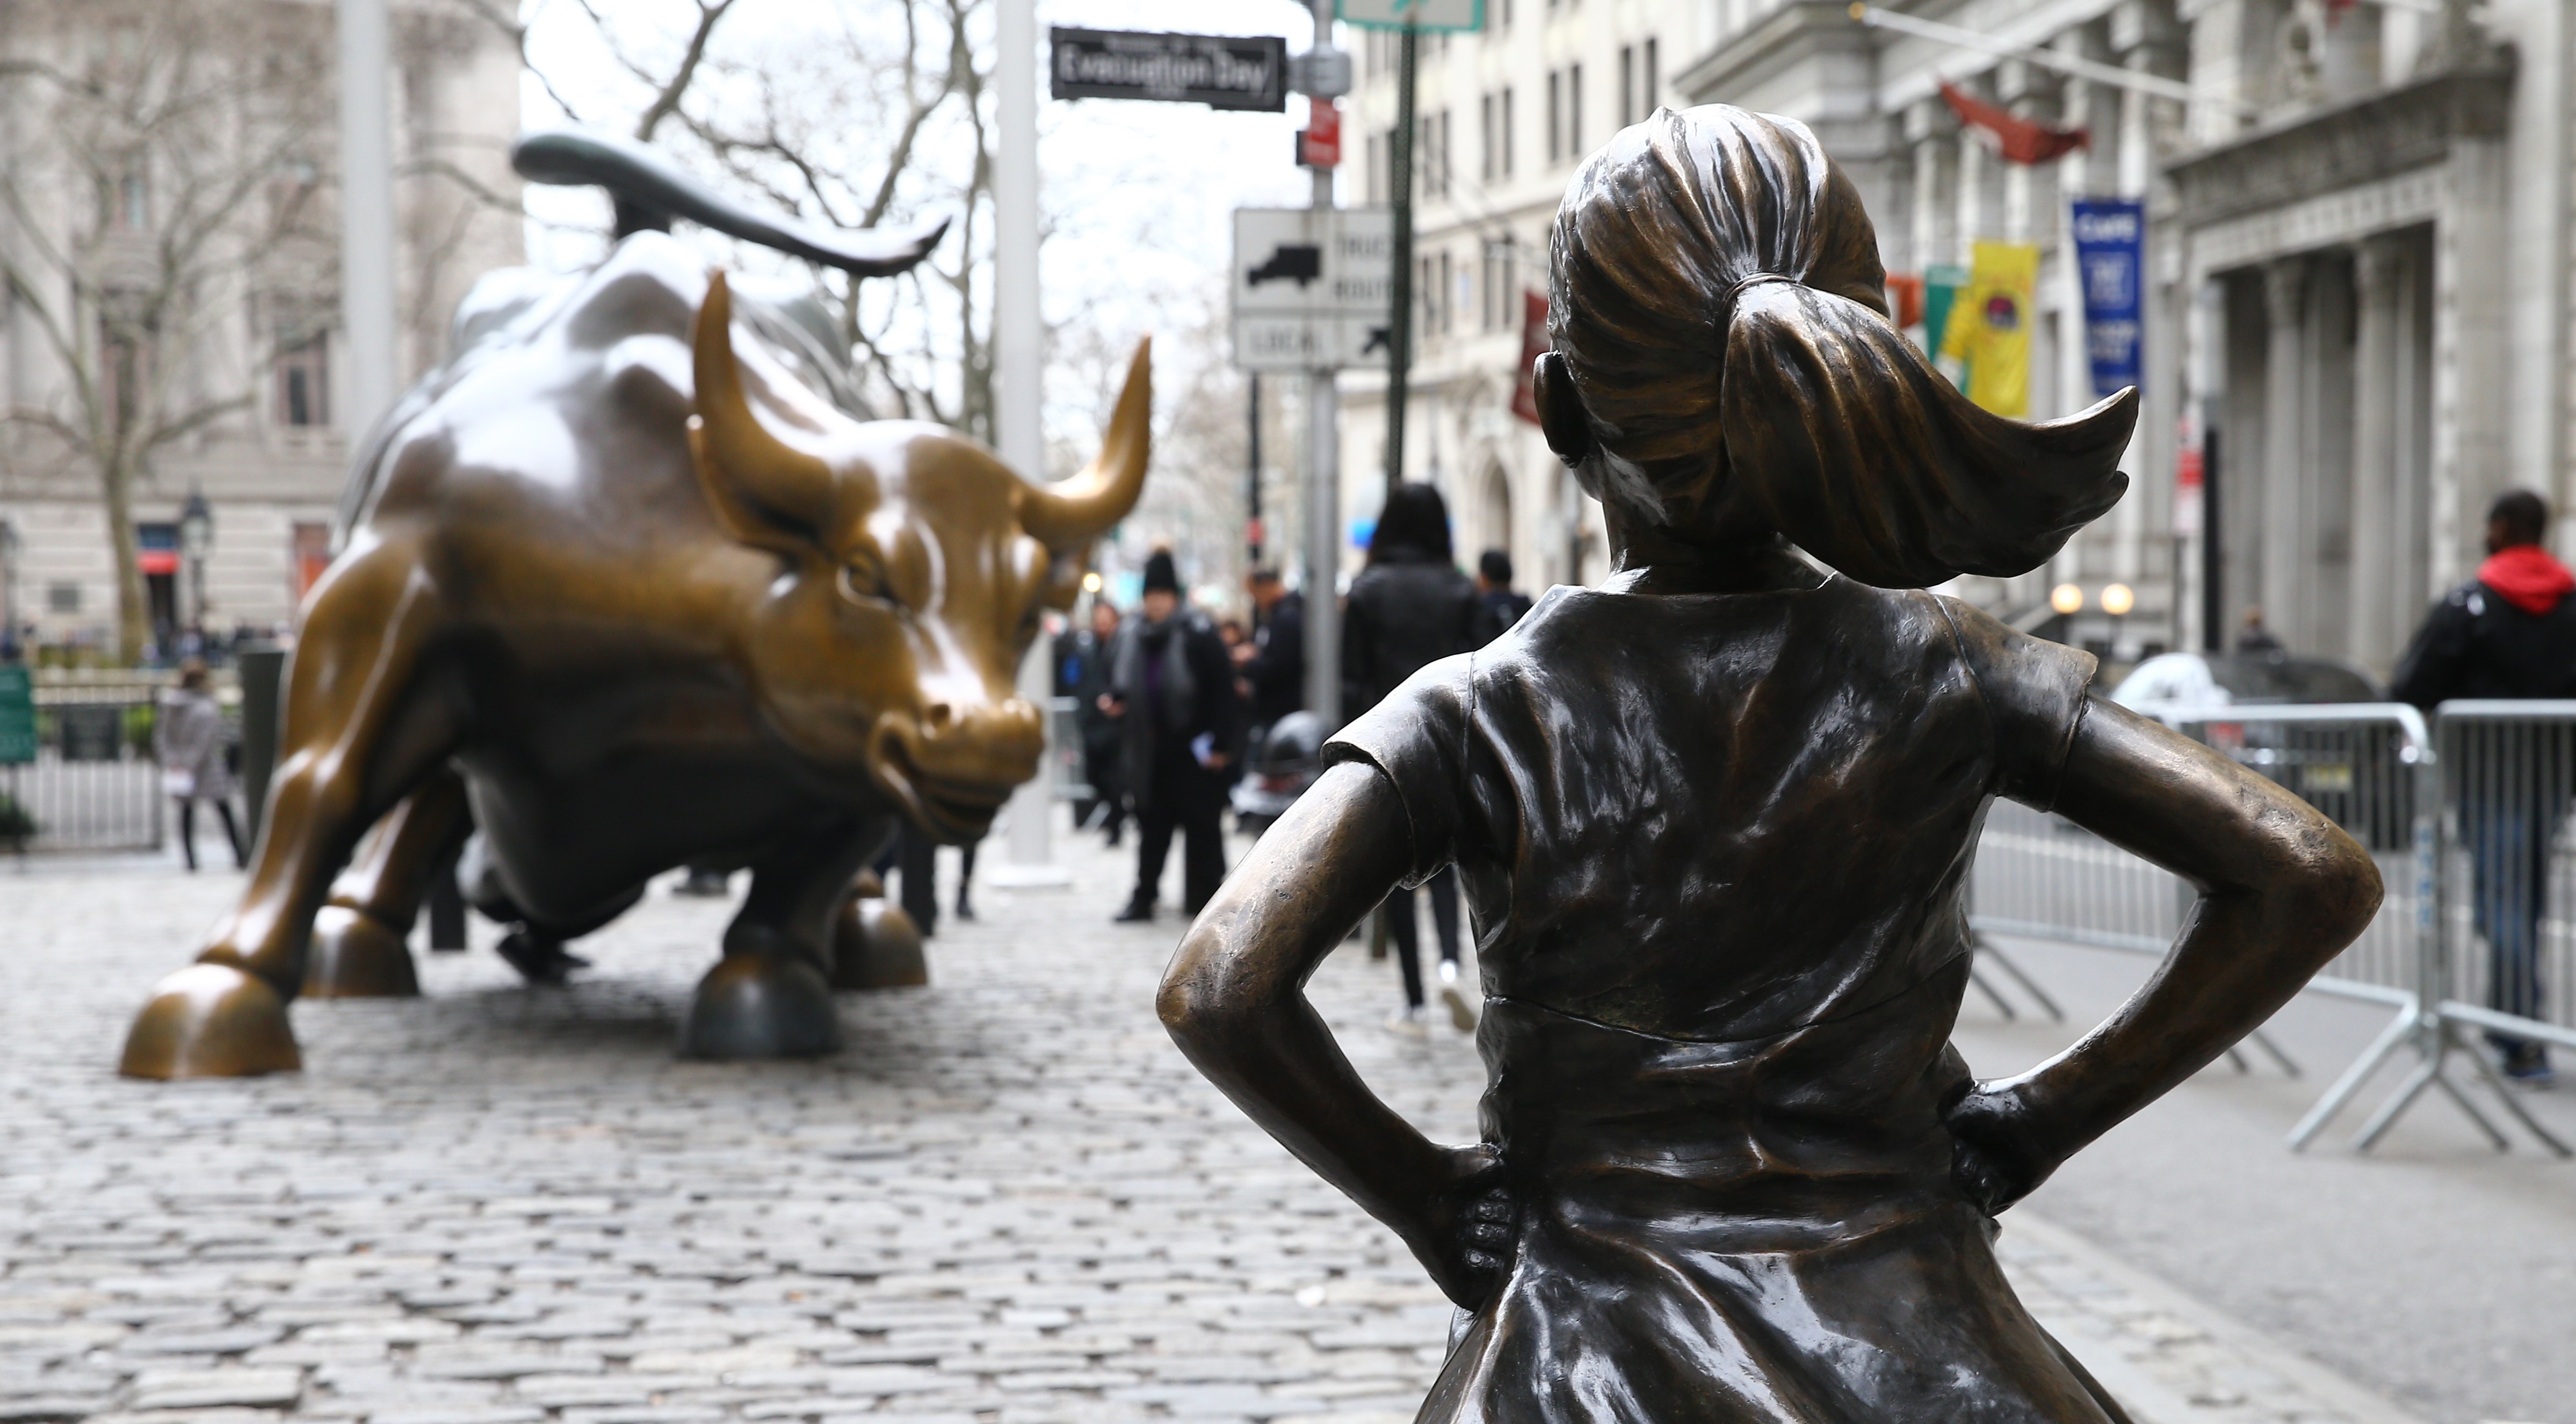 The "Fearless Girl" statue, a four-foot statue of a young girl, defiantly looks up the iconic Wall Street "Charging Bull" sculpture in New York City, United States on March 29, 2017.  "Fearless Girl" statue was installed in front of the bronze "Charging Bull" for International Women's Day earlier this month to draw attention to the gender pay gap and lack of gender diversity on corporate boards in the financial sector. The statue will remain at her post until February 2018. (Photo by Volkan Furuncu—Anadolu Agency/Getty Images)